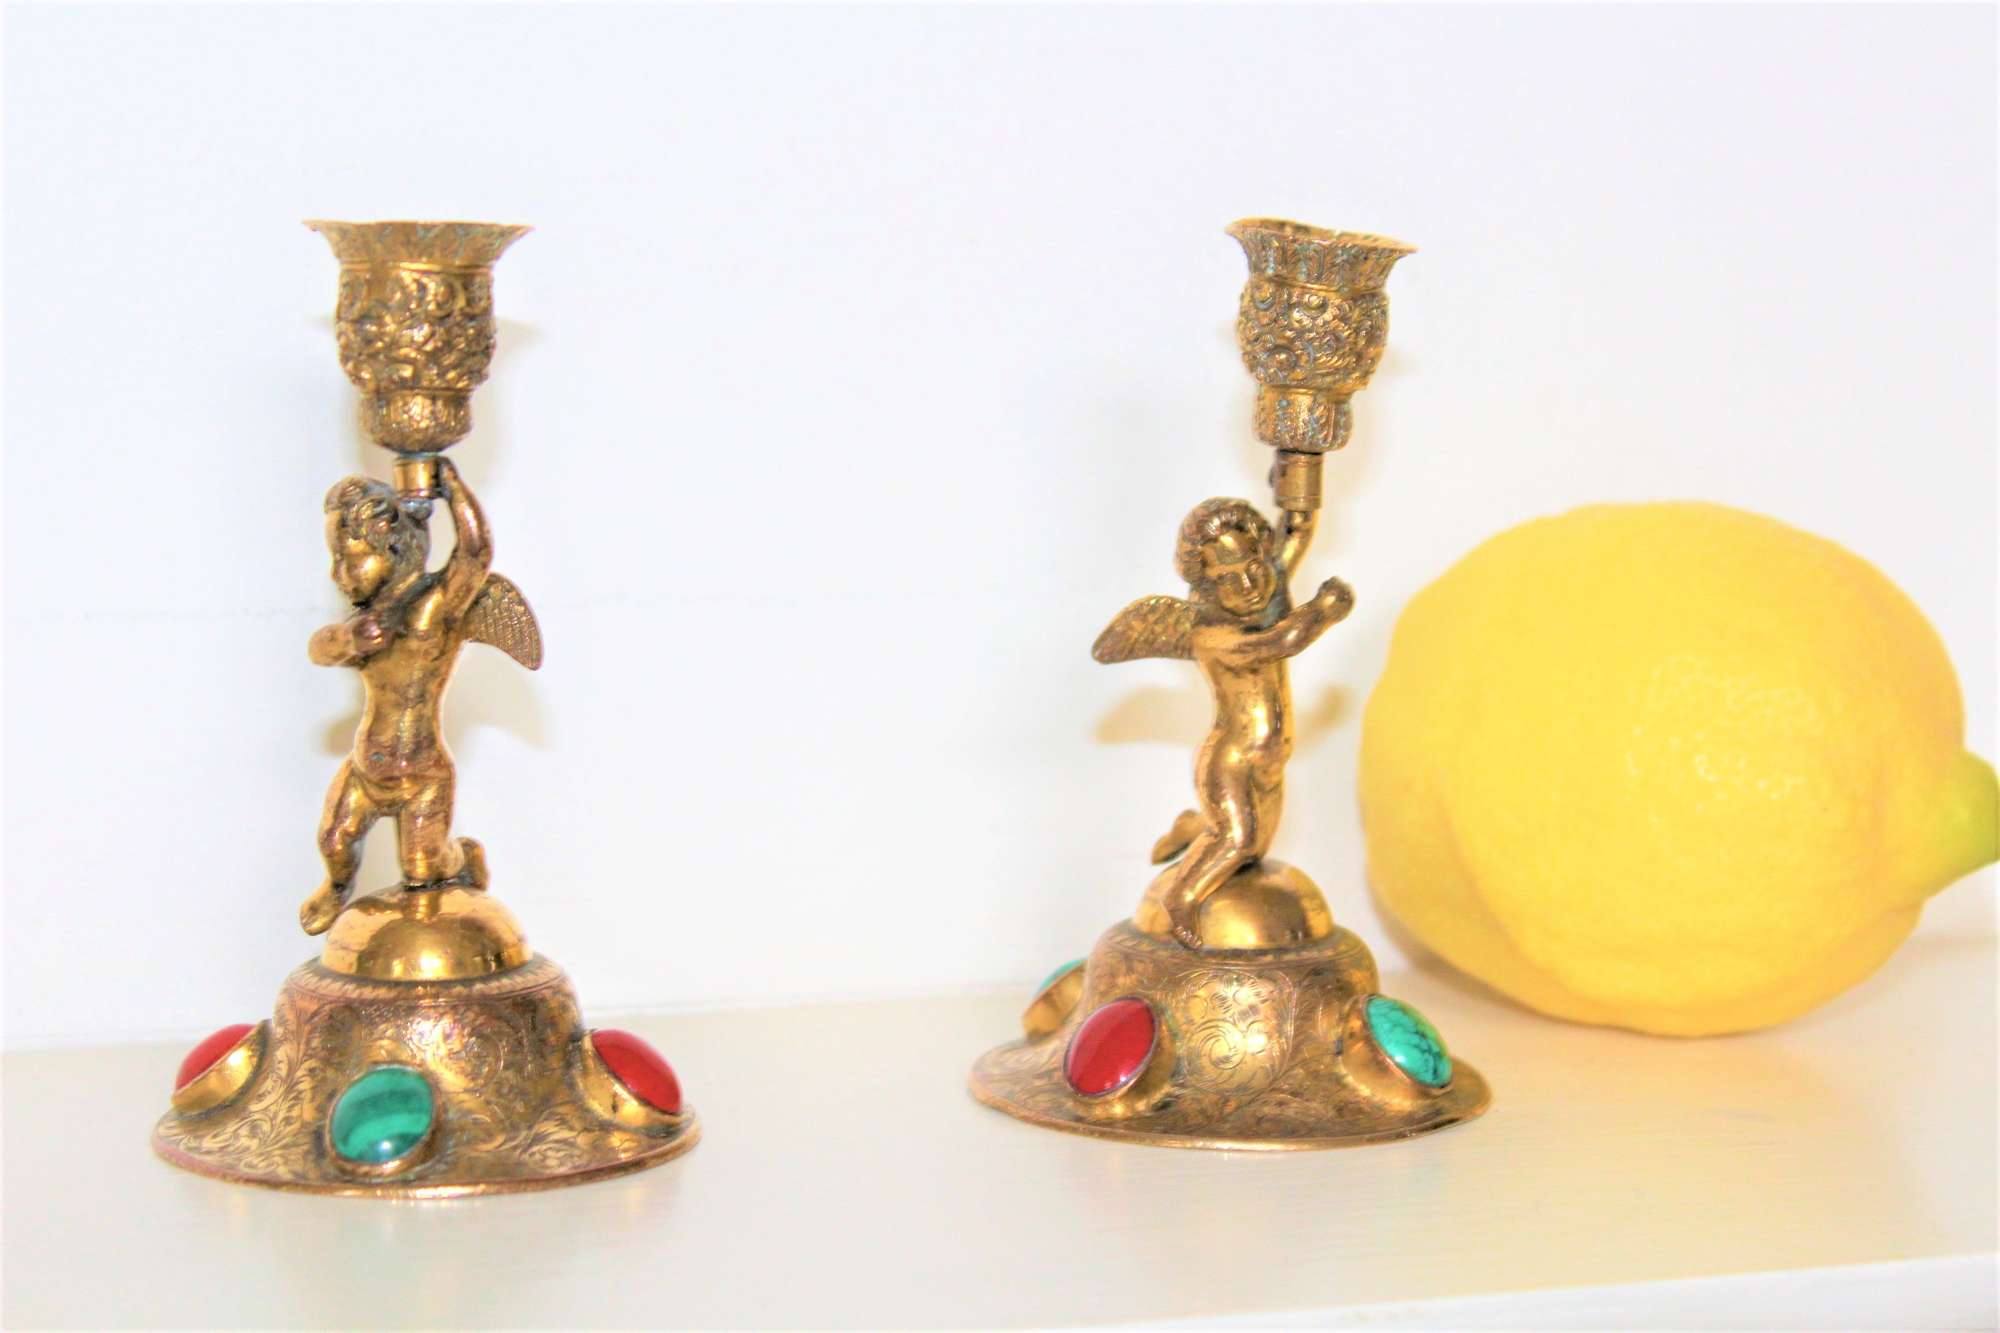 A Pair Of Small Ormolu Antique Candlesticks Depicting Winged Cherubs